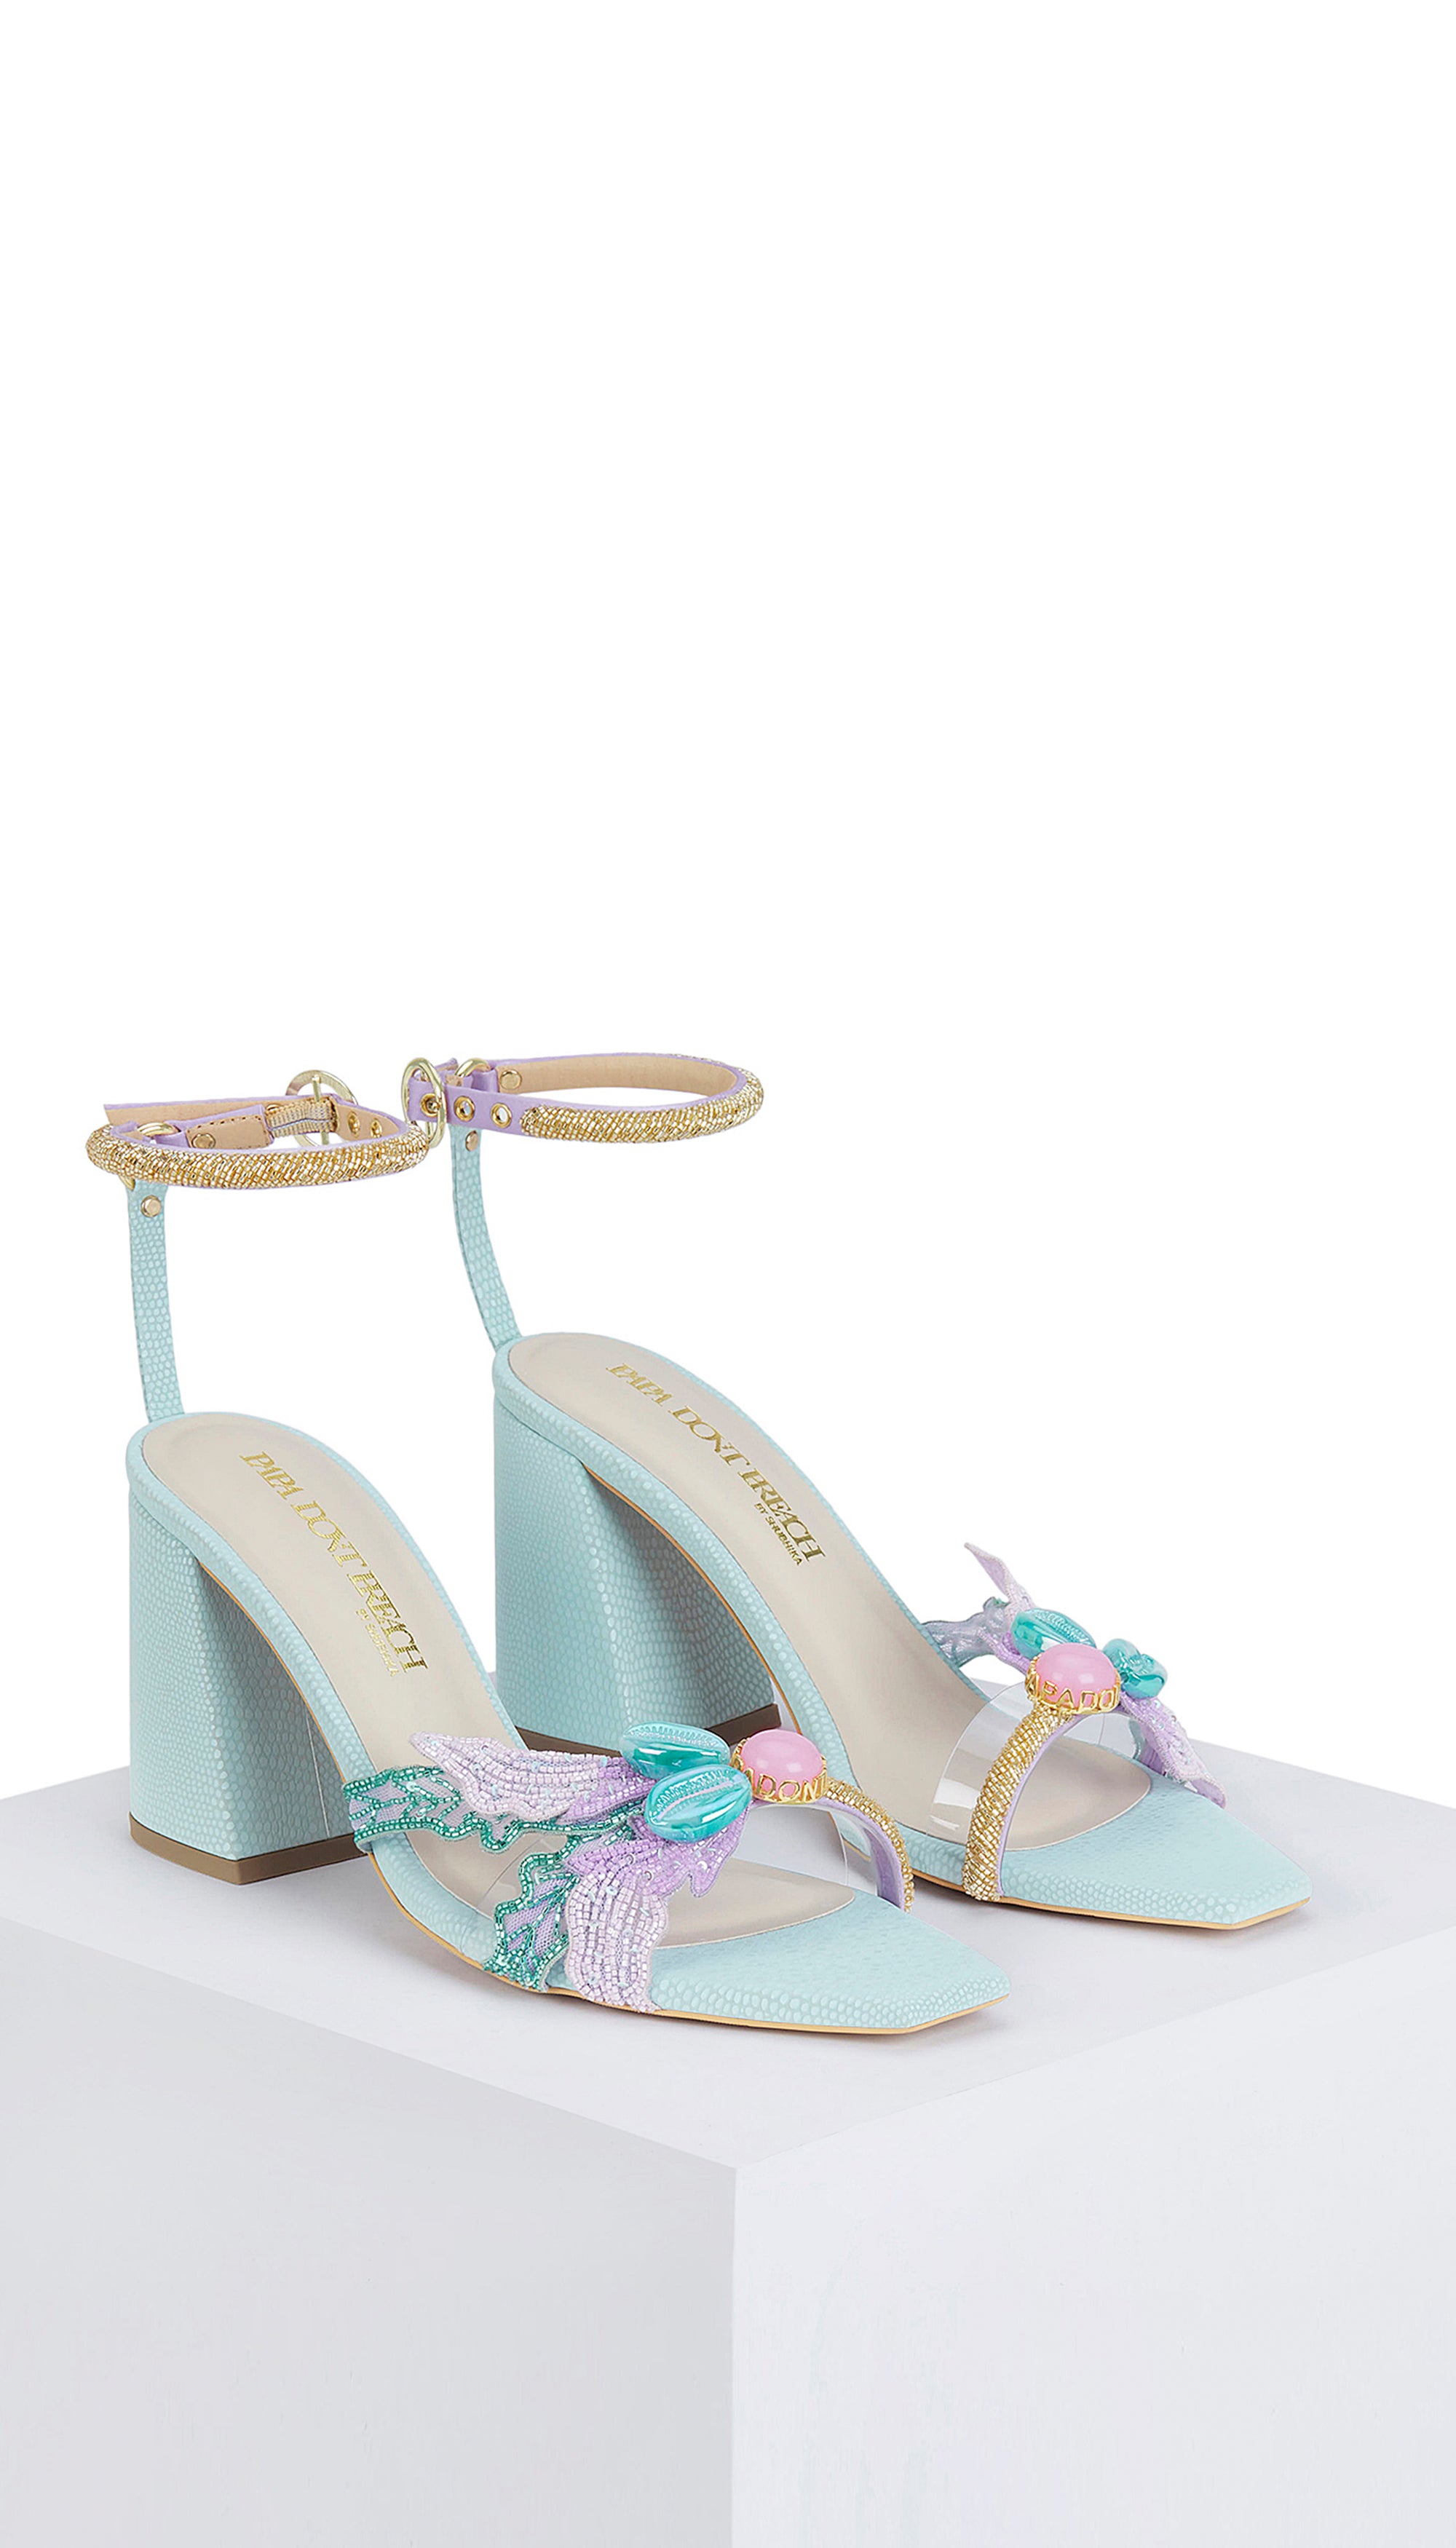 10 Different Types Of Footwear For Brides To Wear For The Wedding, From  Ballerinas To Sneakers